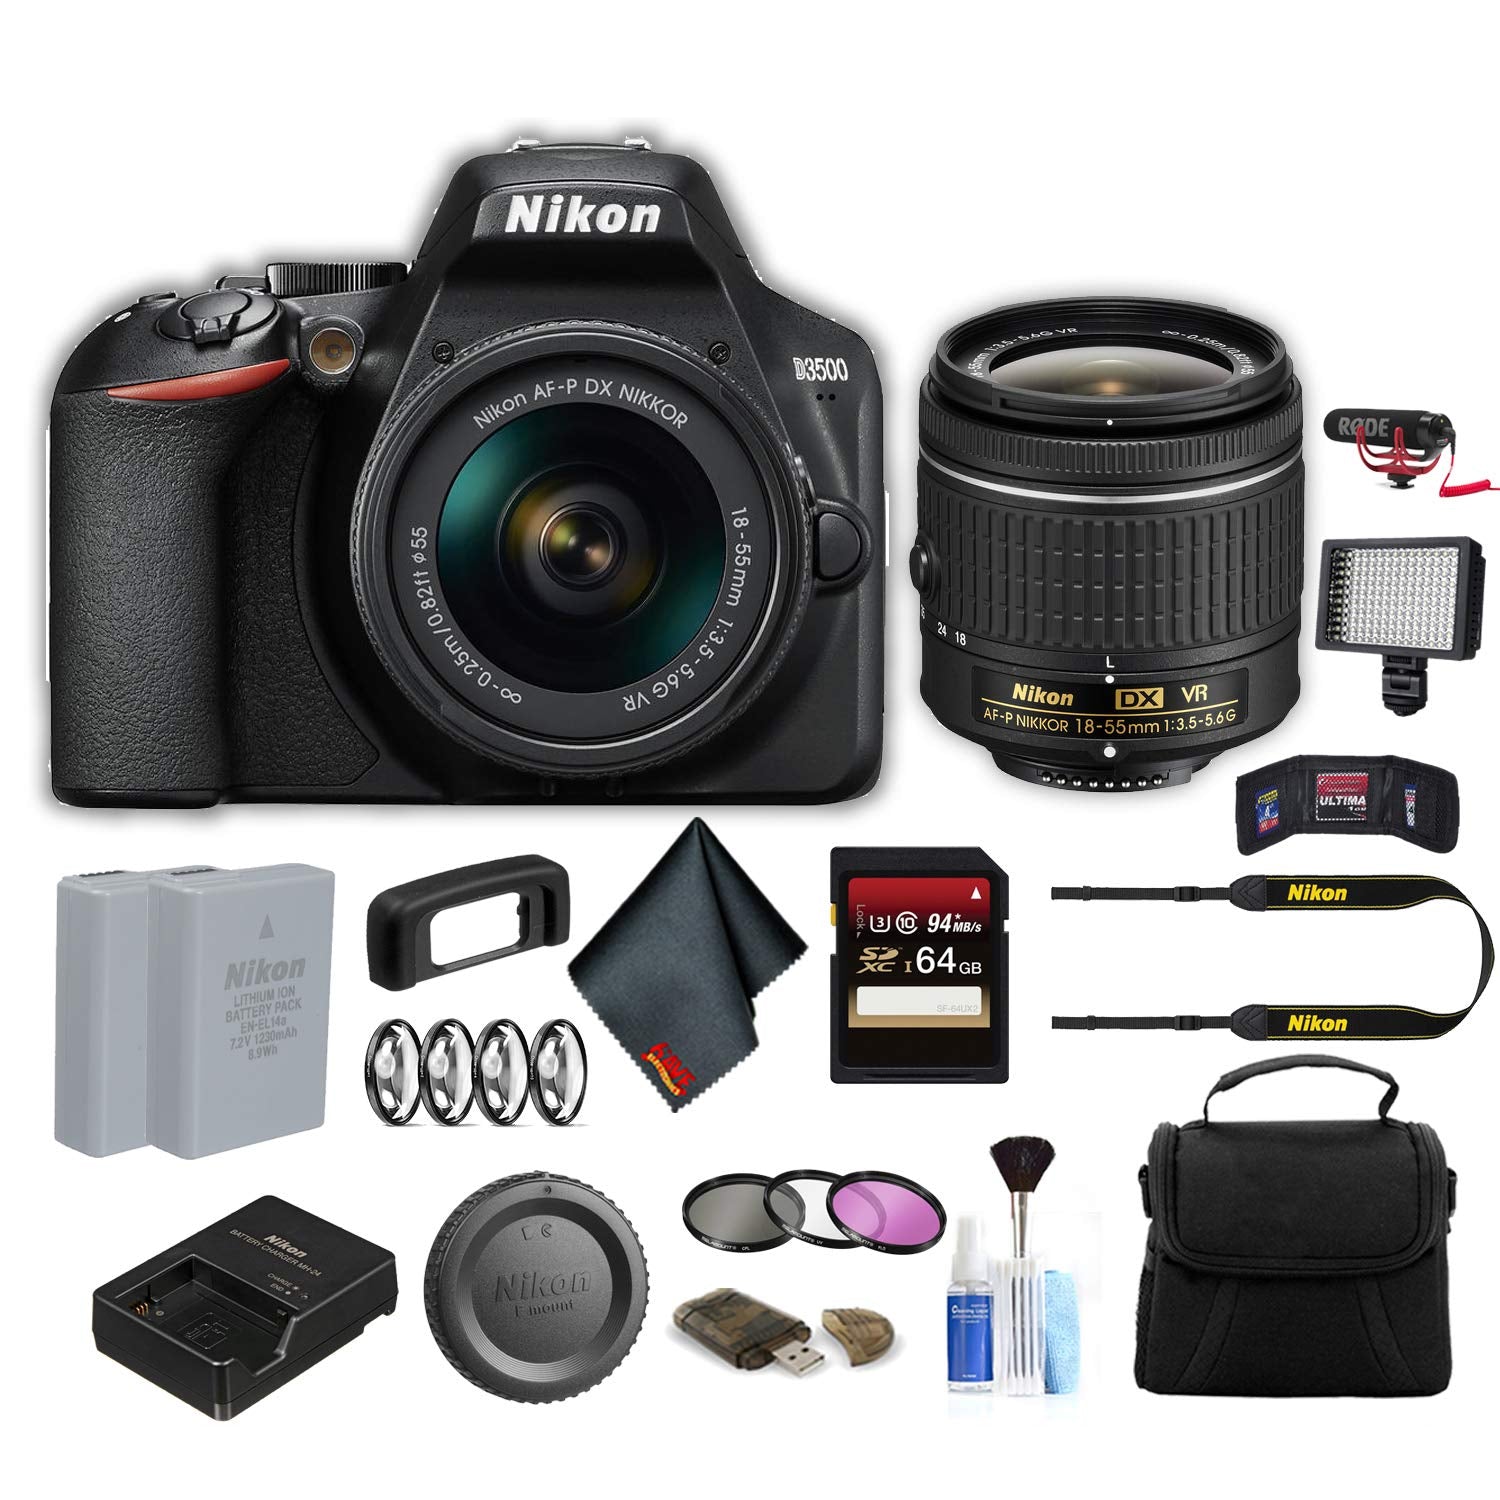 Nikon D3500 DSLR Camera with 18-55mm Lens (1590) Advanced Bundle W/Bag, Extra Battery, LED Light, Mic, Filters and More